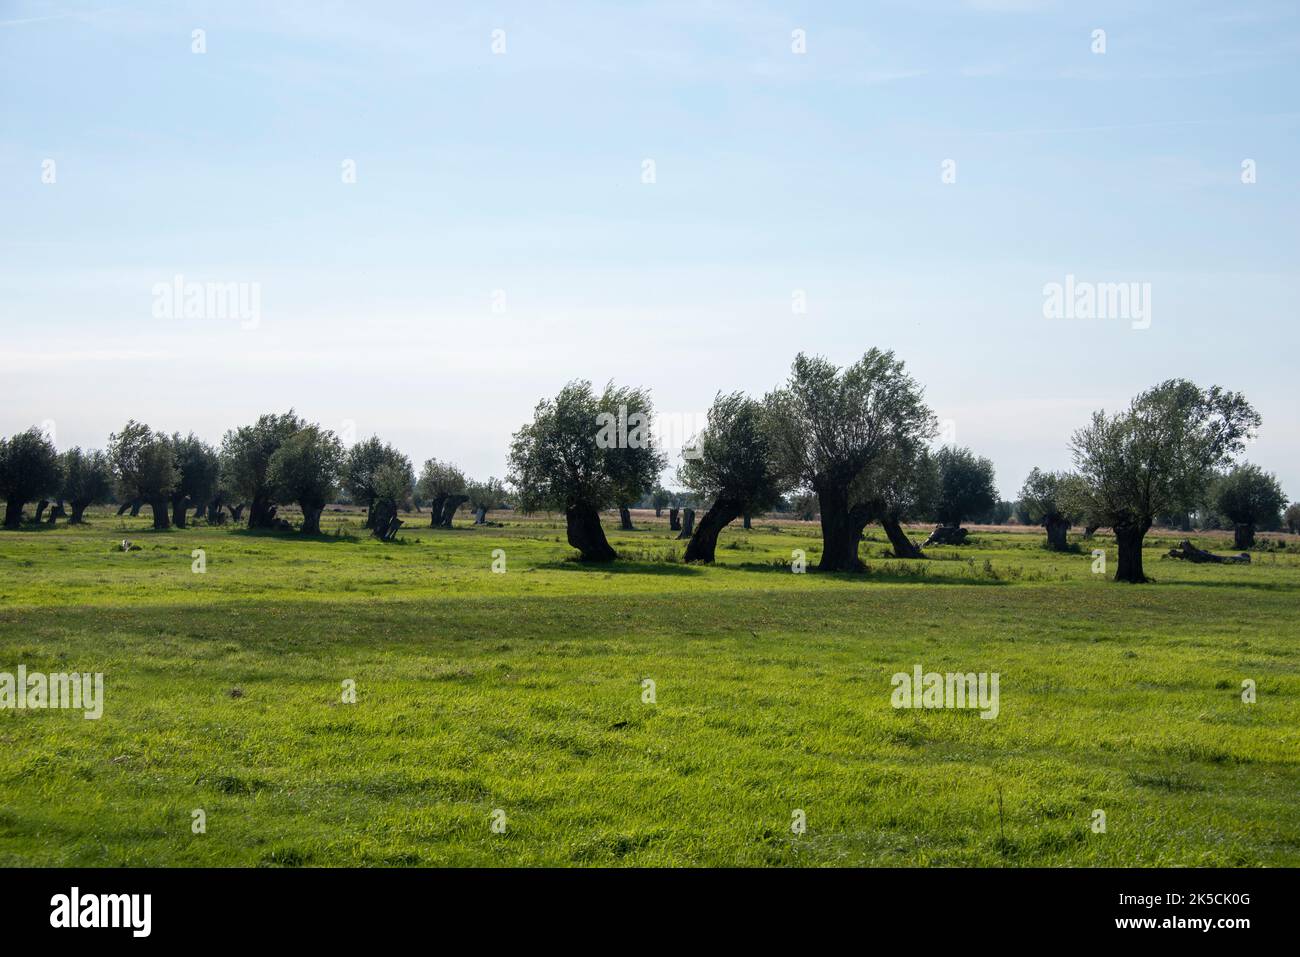 Silver willows, Havel lowland, Kuhlhausen, Saxony-Anhalt, Germany Stock Photo